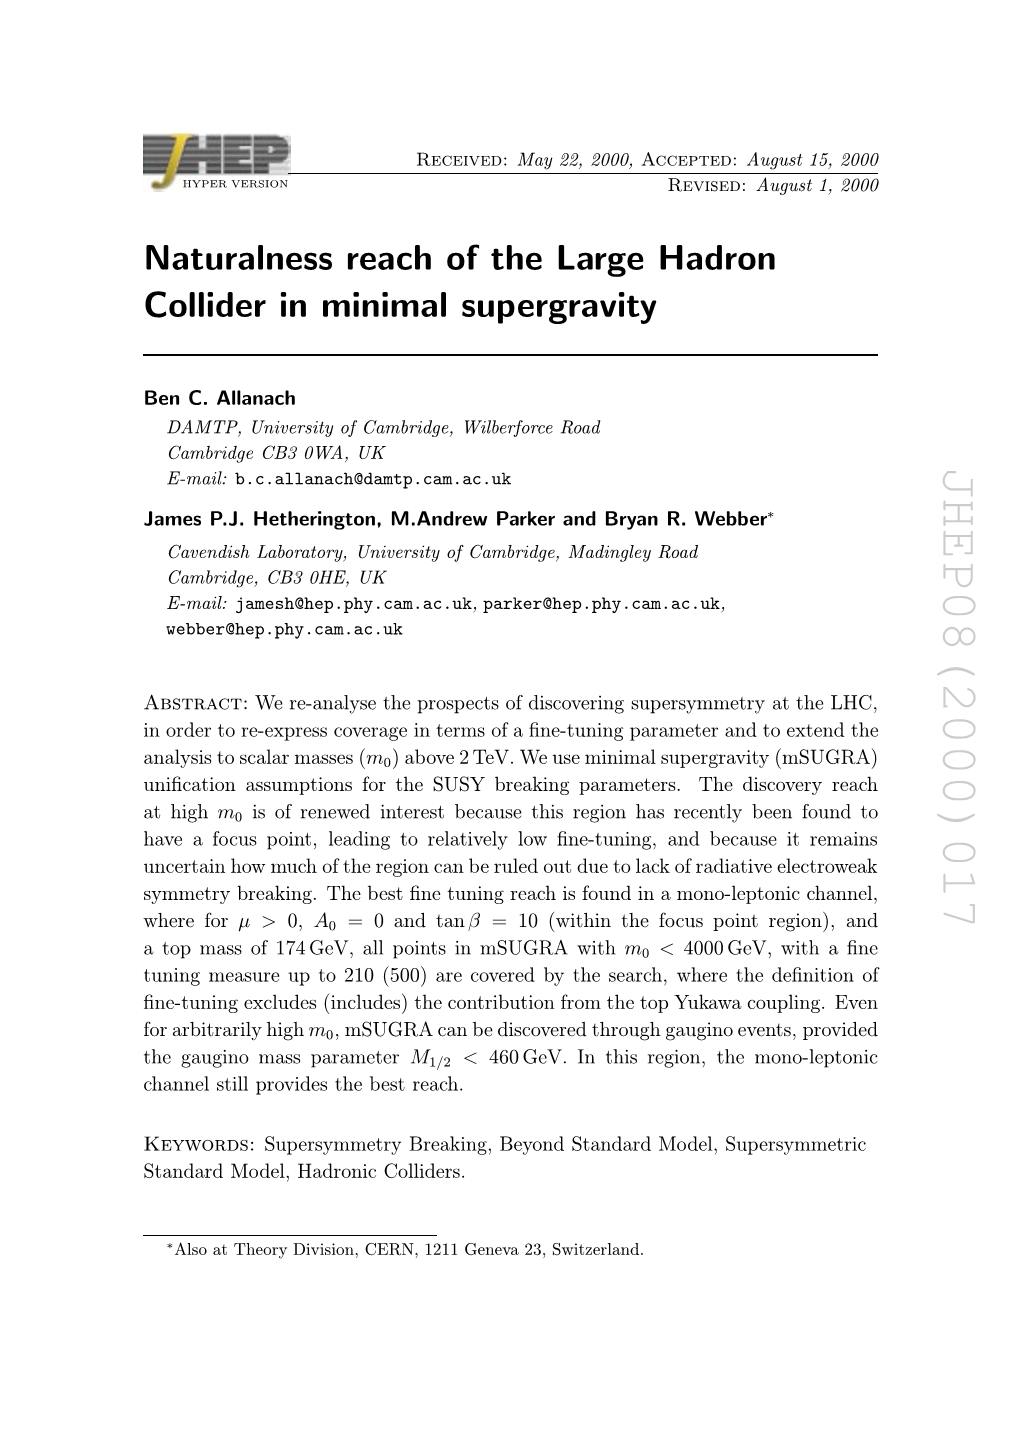 Naturalness Reach of the Large Hadron Collider in Minimal